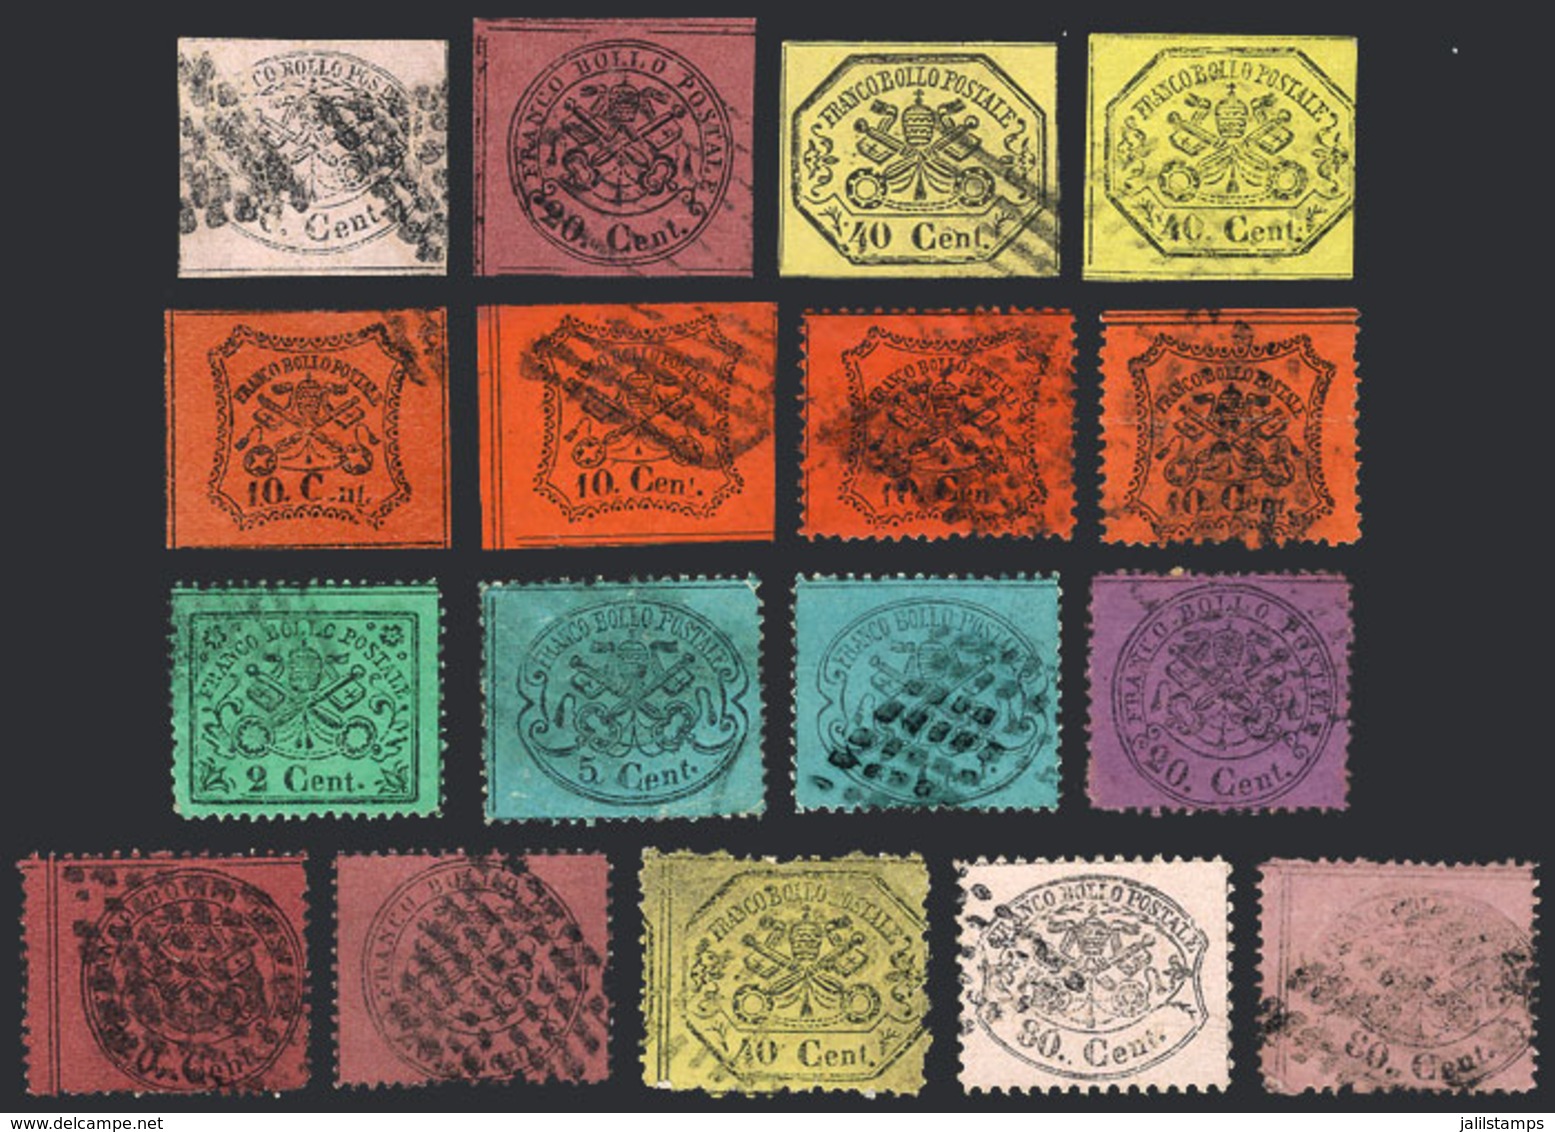 1453 ITALY: Lot Of Stamps Issued Between 1867 And 1868, Used, The General Quality Is Fine To Very Fine. Scott Catalog Va - Papal States